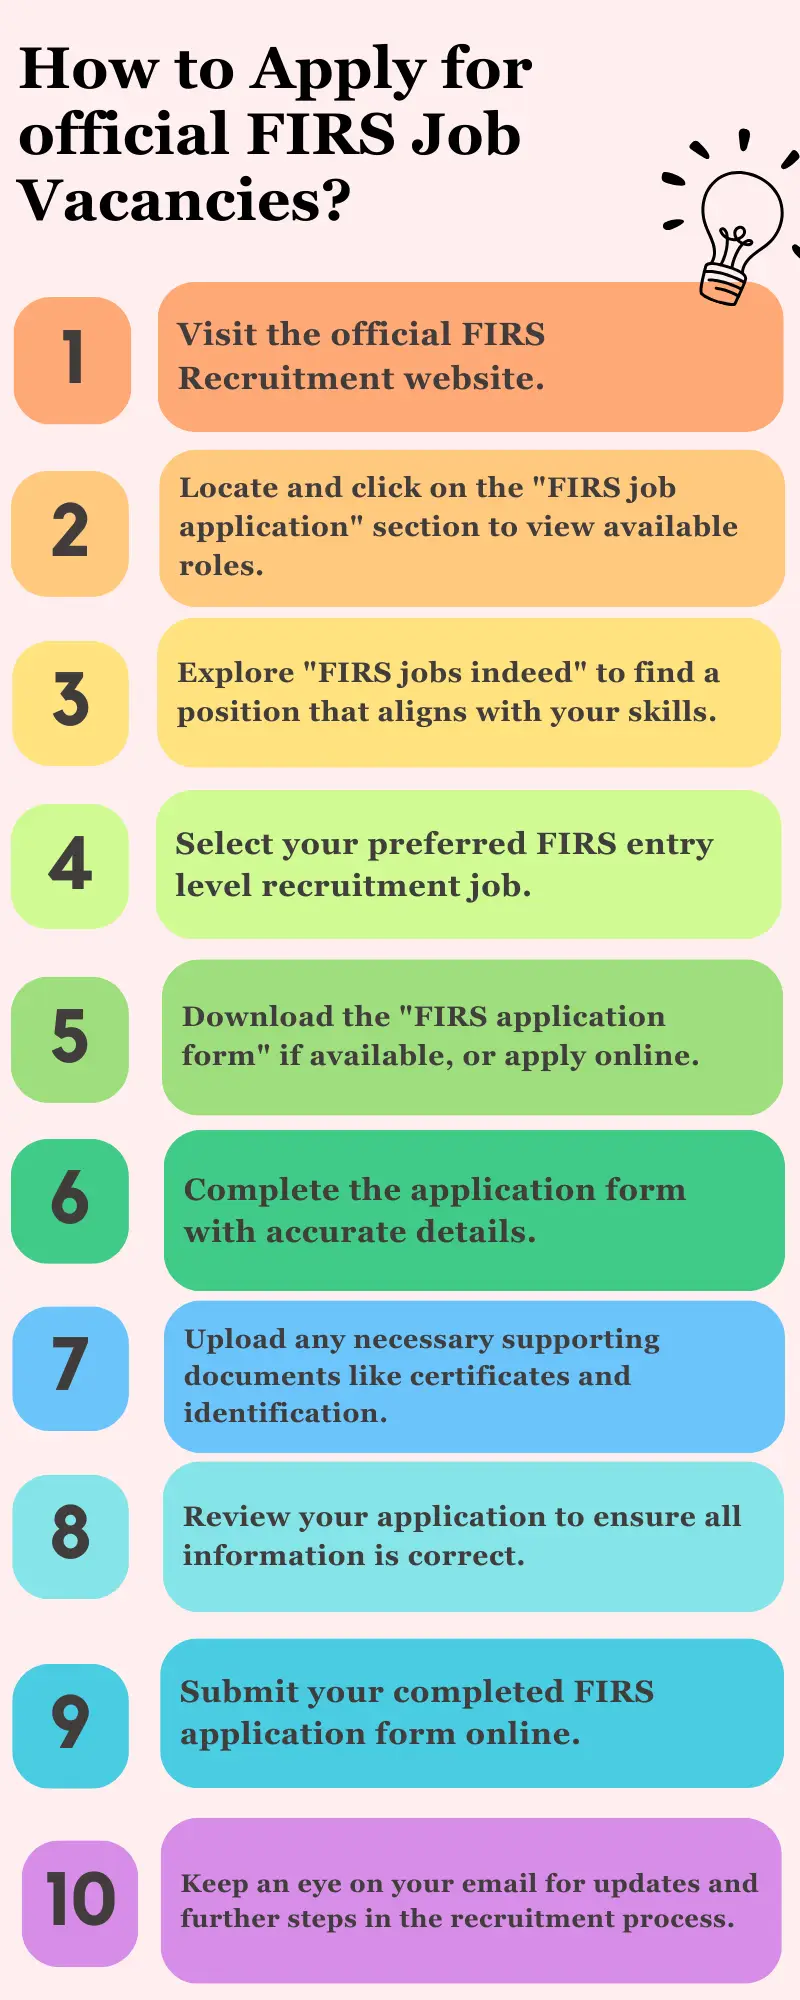 How to Apply for official FIRS Job Vacancies?